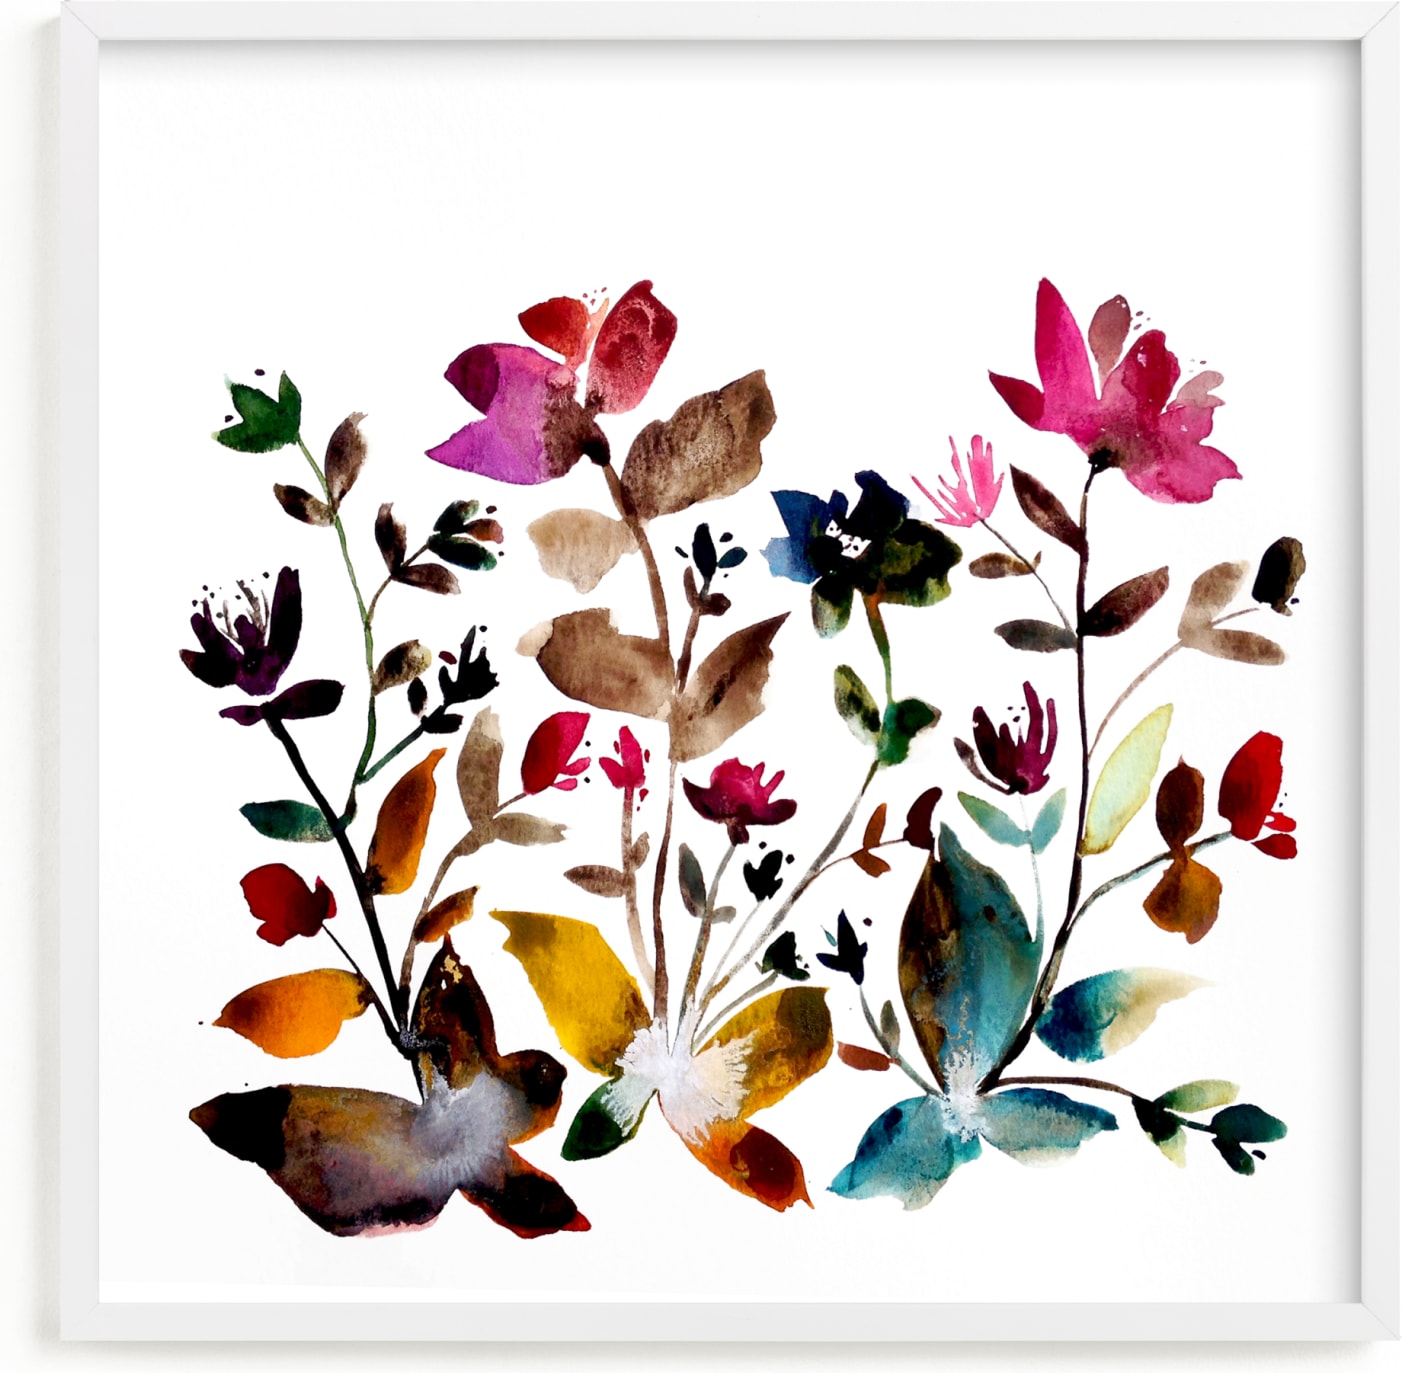 This is a brown art by Kiana Lee called island wildflowers no.6.